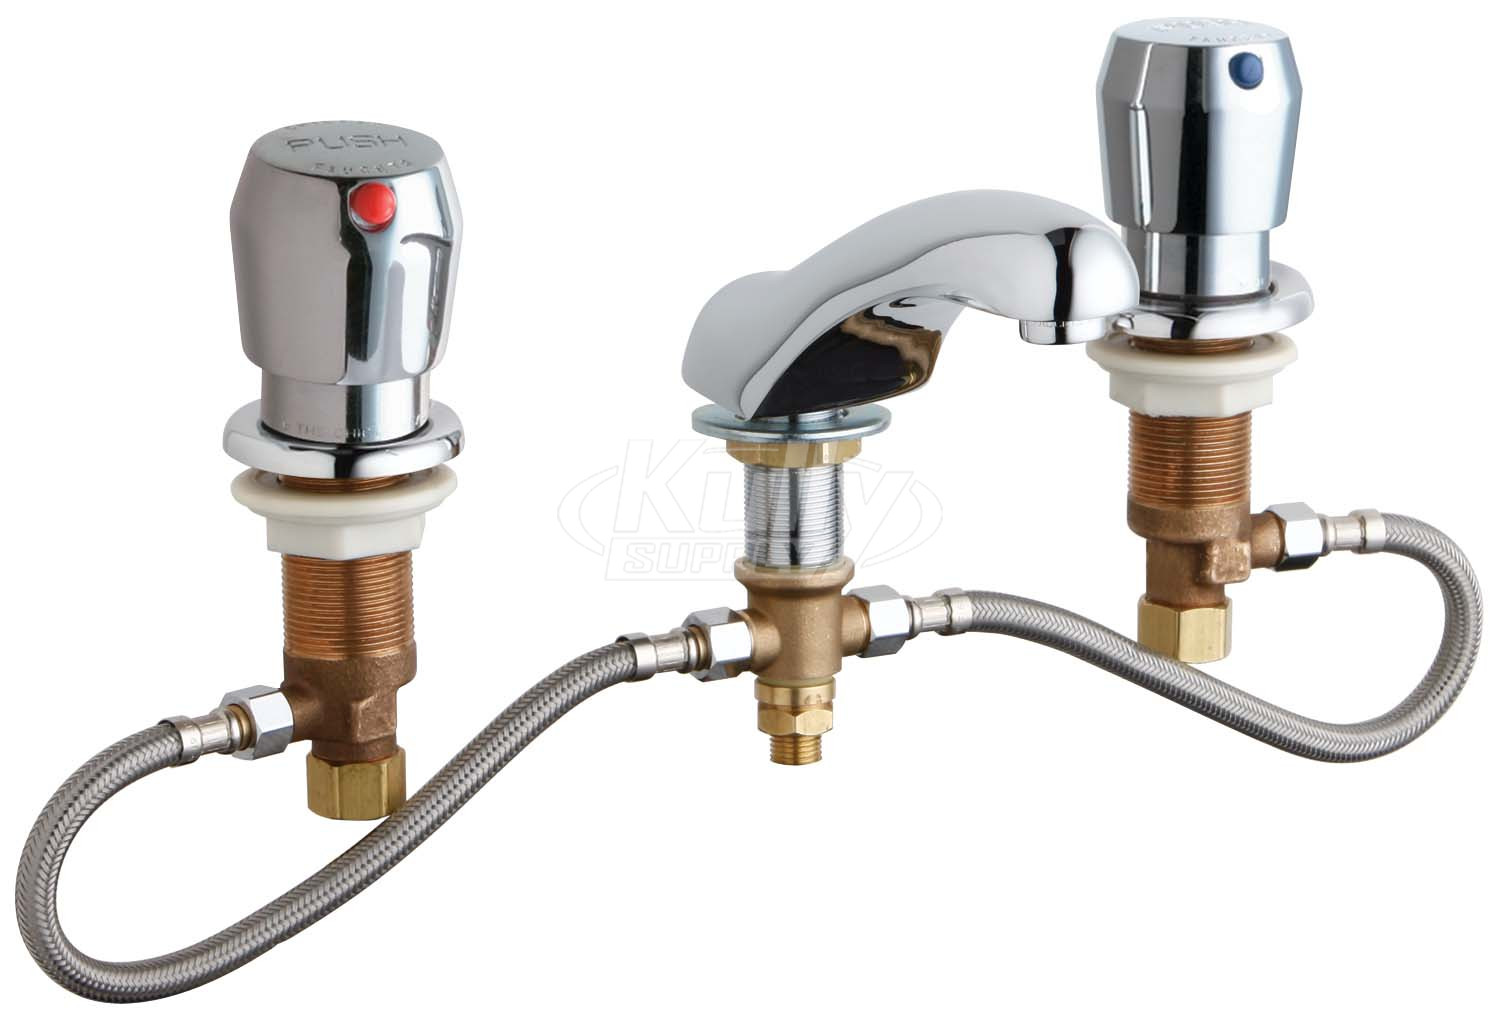 Chicago 404-HZ665ABCP Concealed Hot and Cold Water Metering Sink Faucet